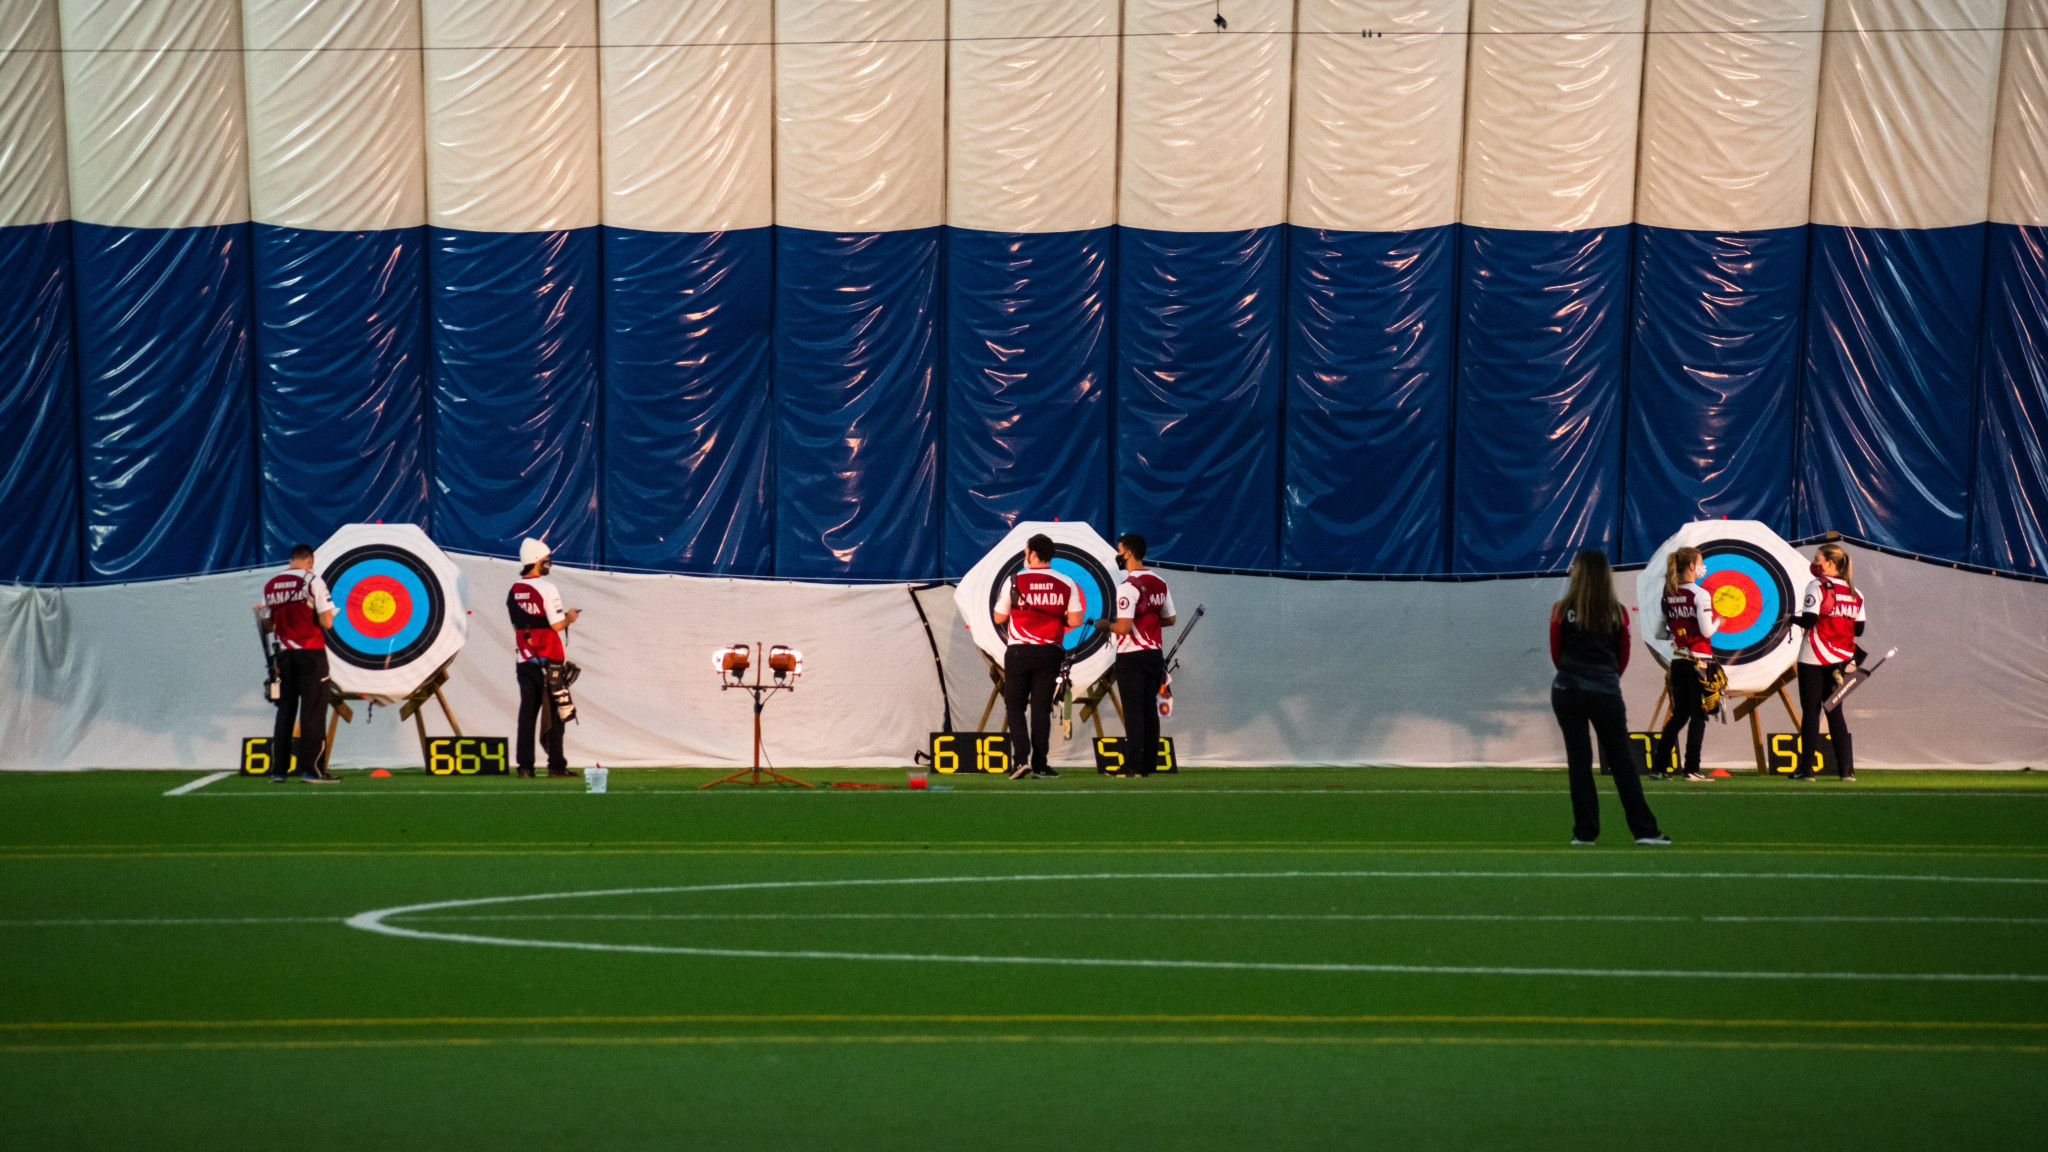 Canadian archers receive exemption to train in lockdown ahead of Tokyo 2020 qualifiers